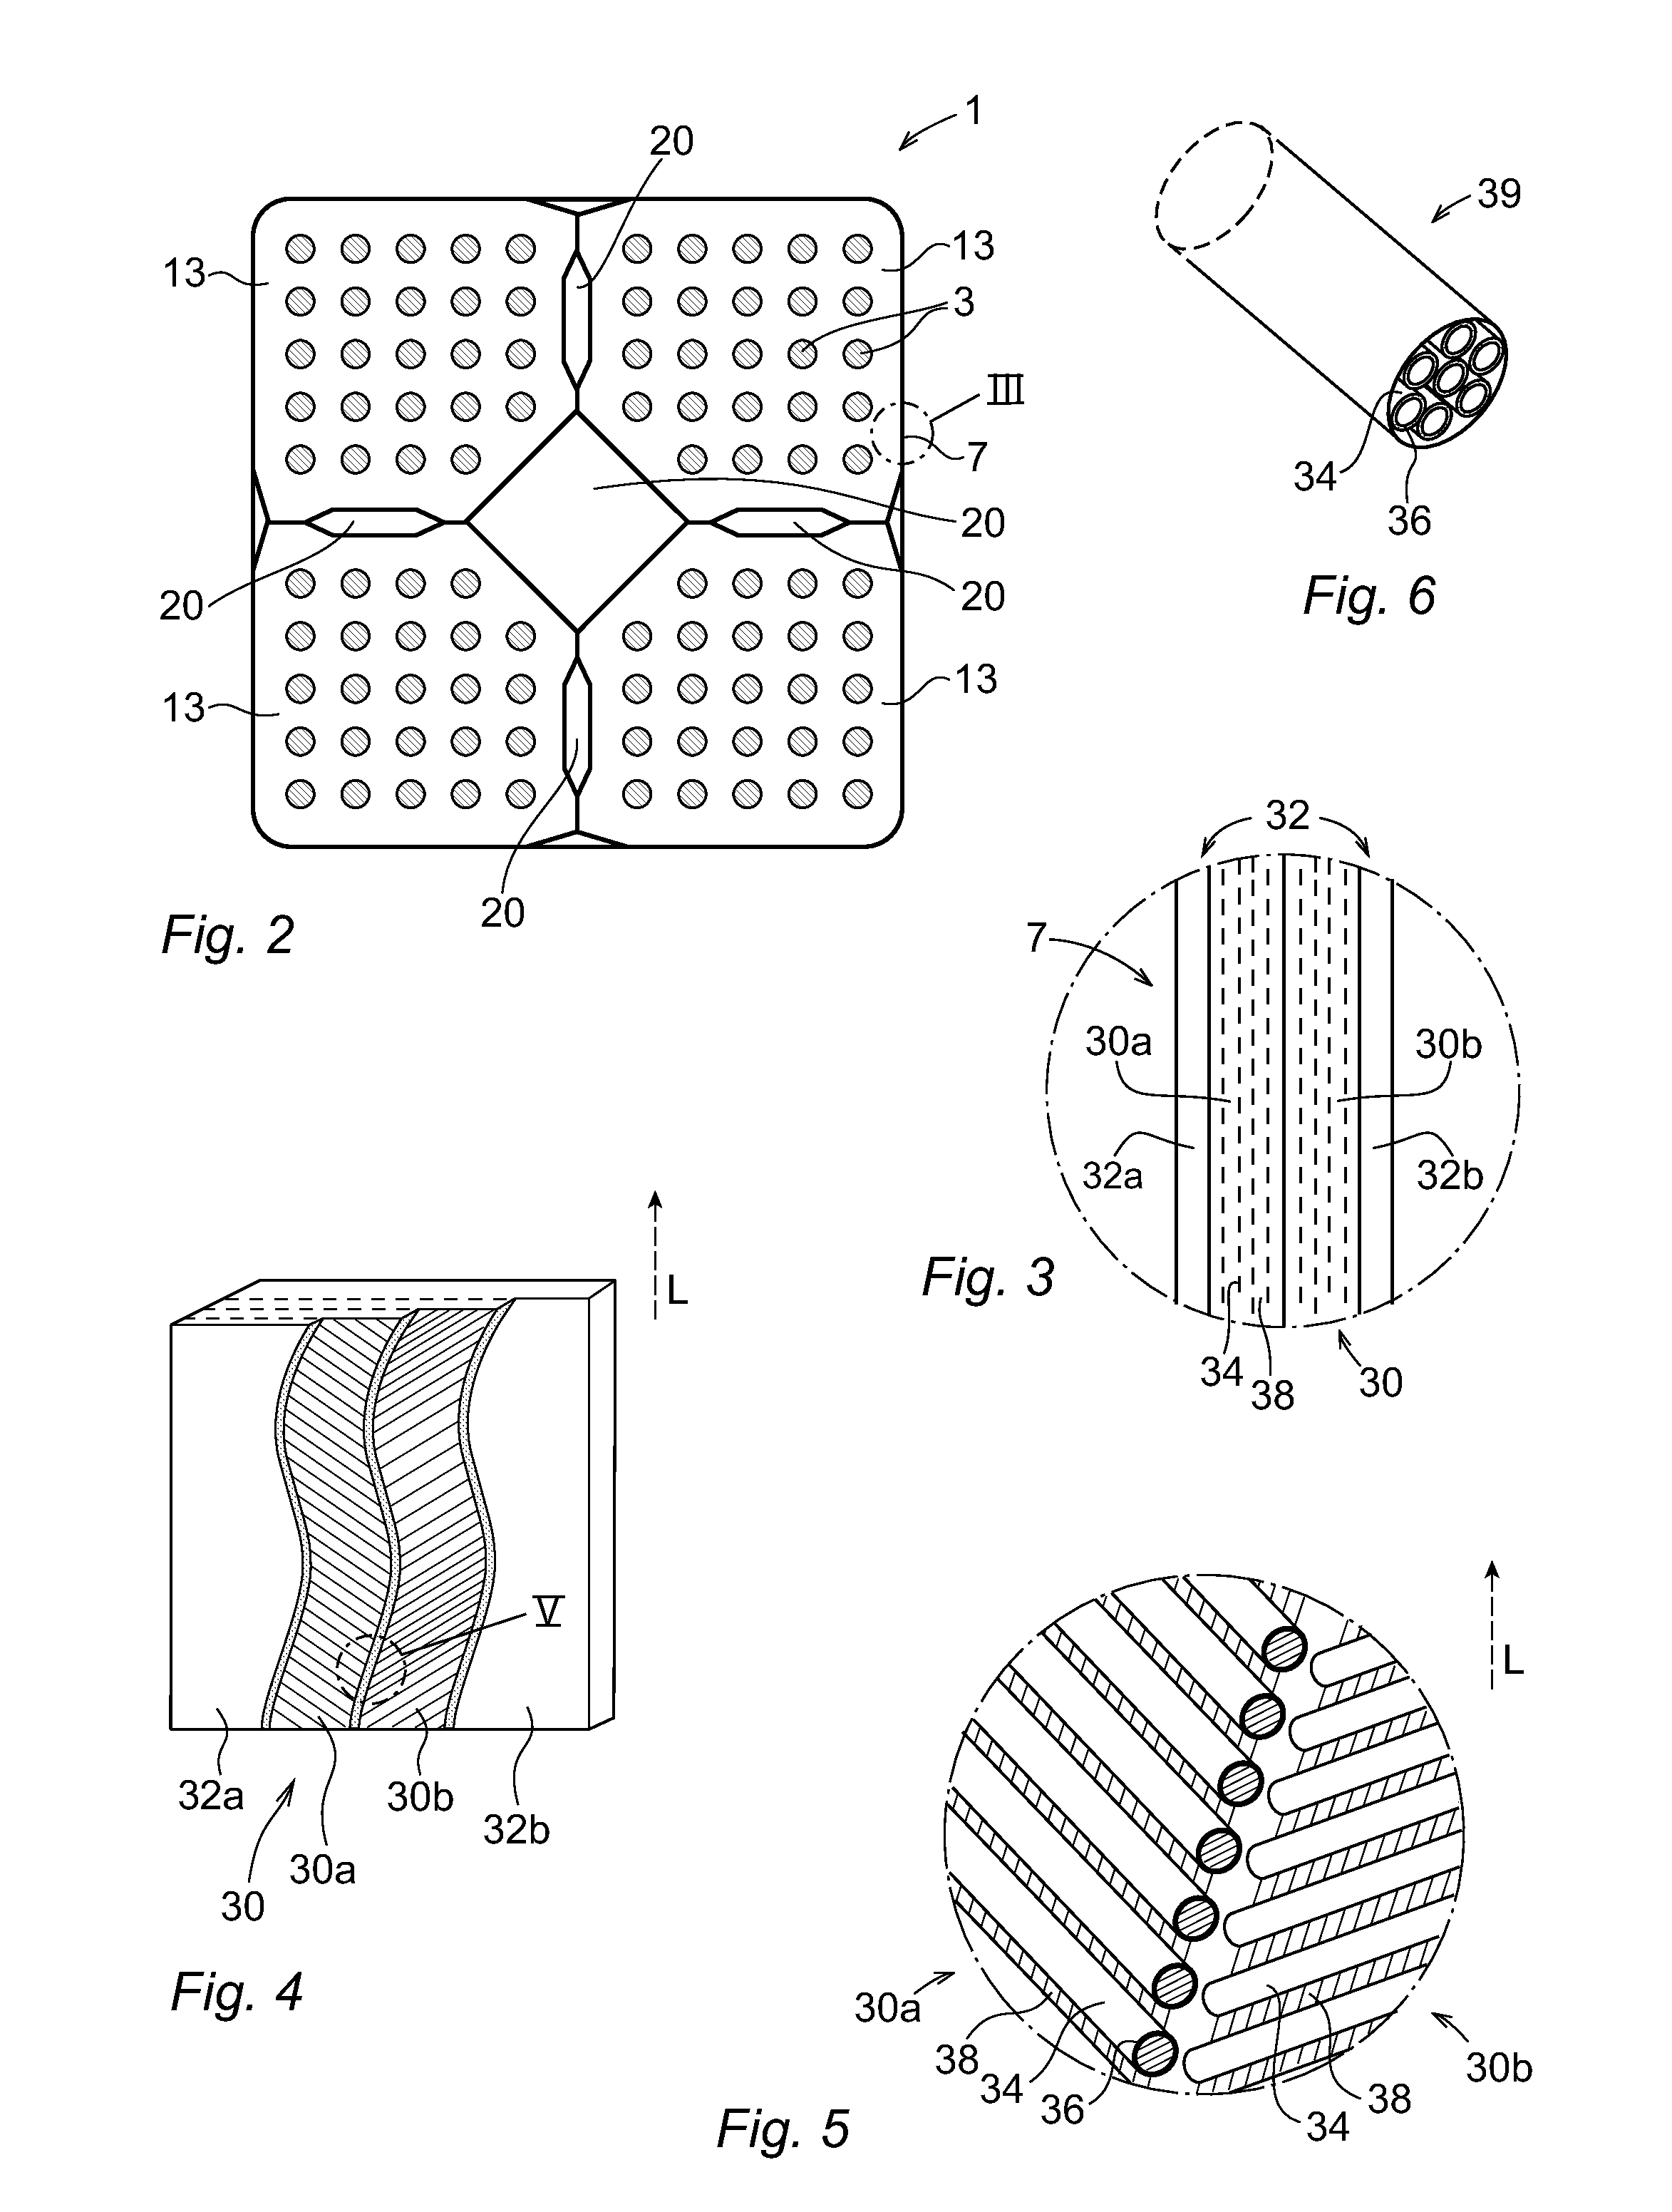 Fuel channel arranged to be comprised by a fuel element for a fission reactor